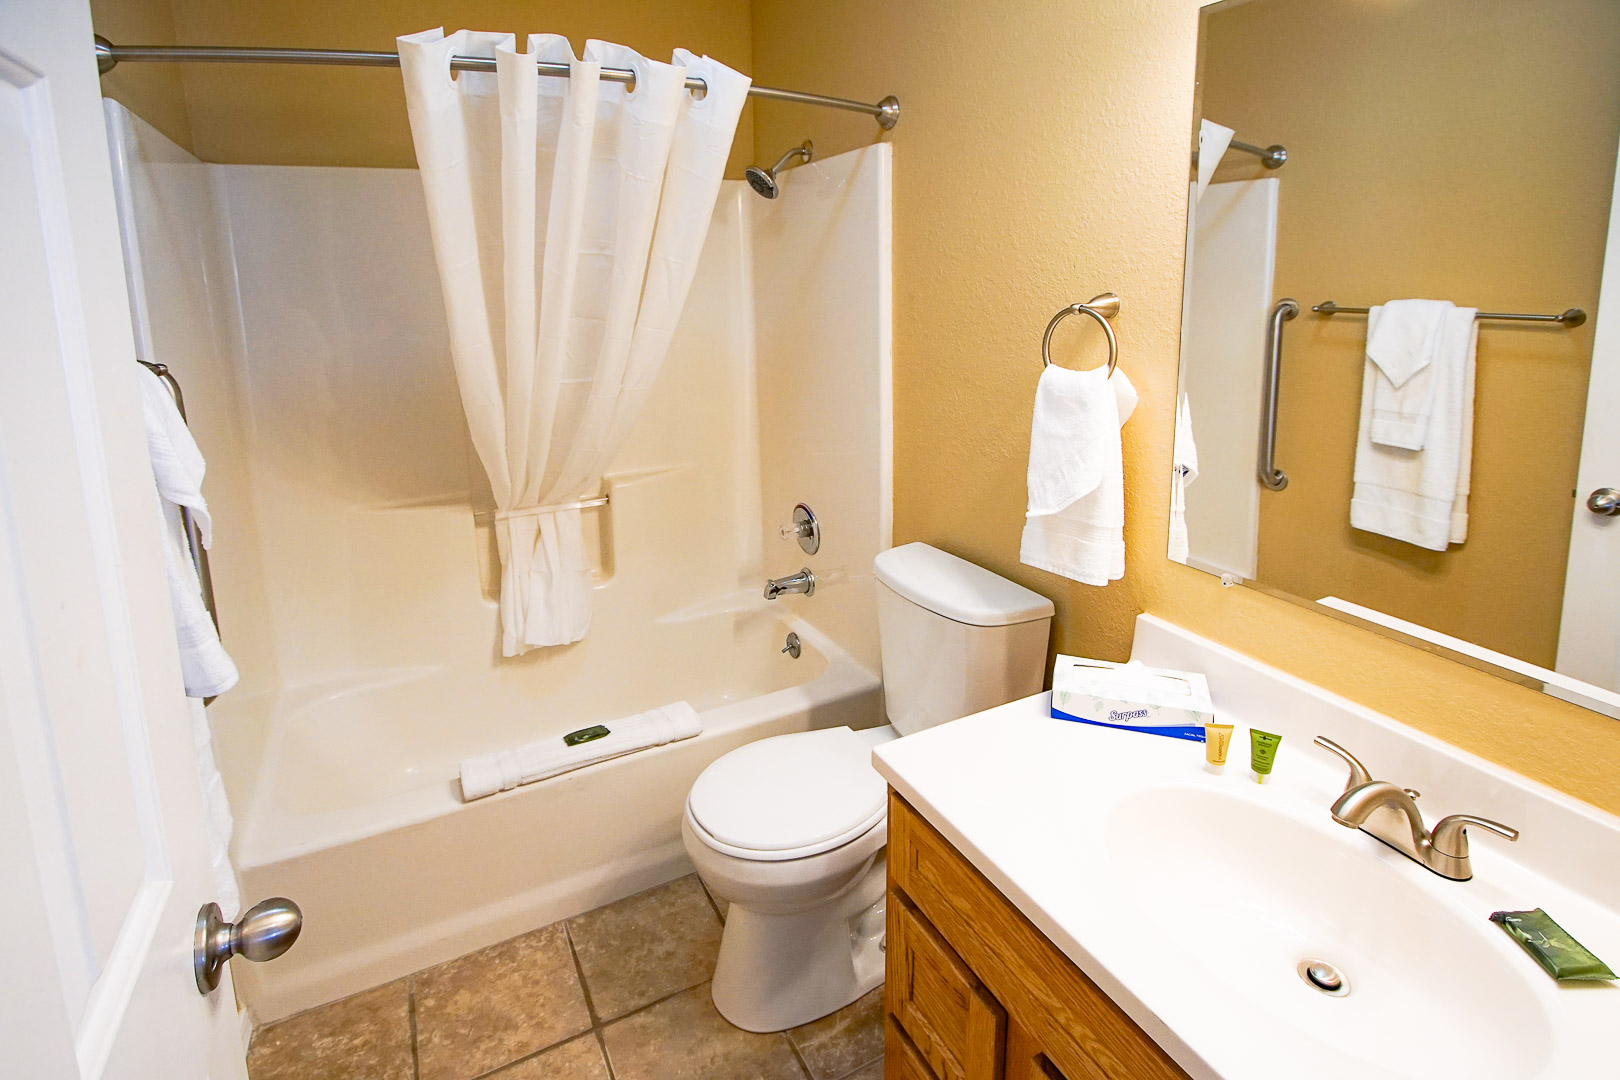 A clean and crisp bathroom at The Townhouses Resort in Branson, Missouri.